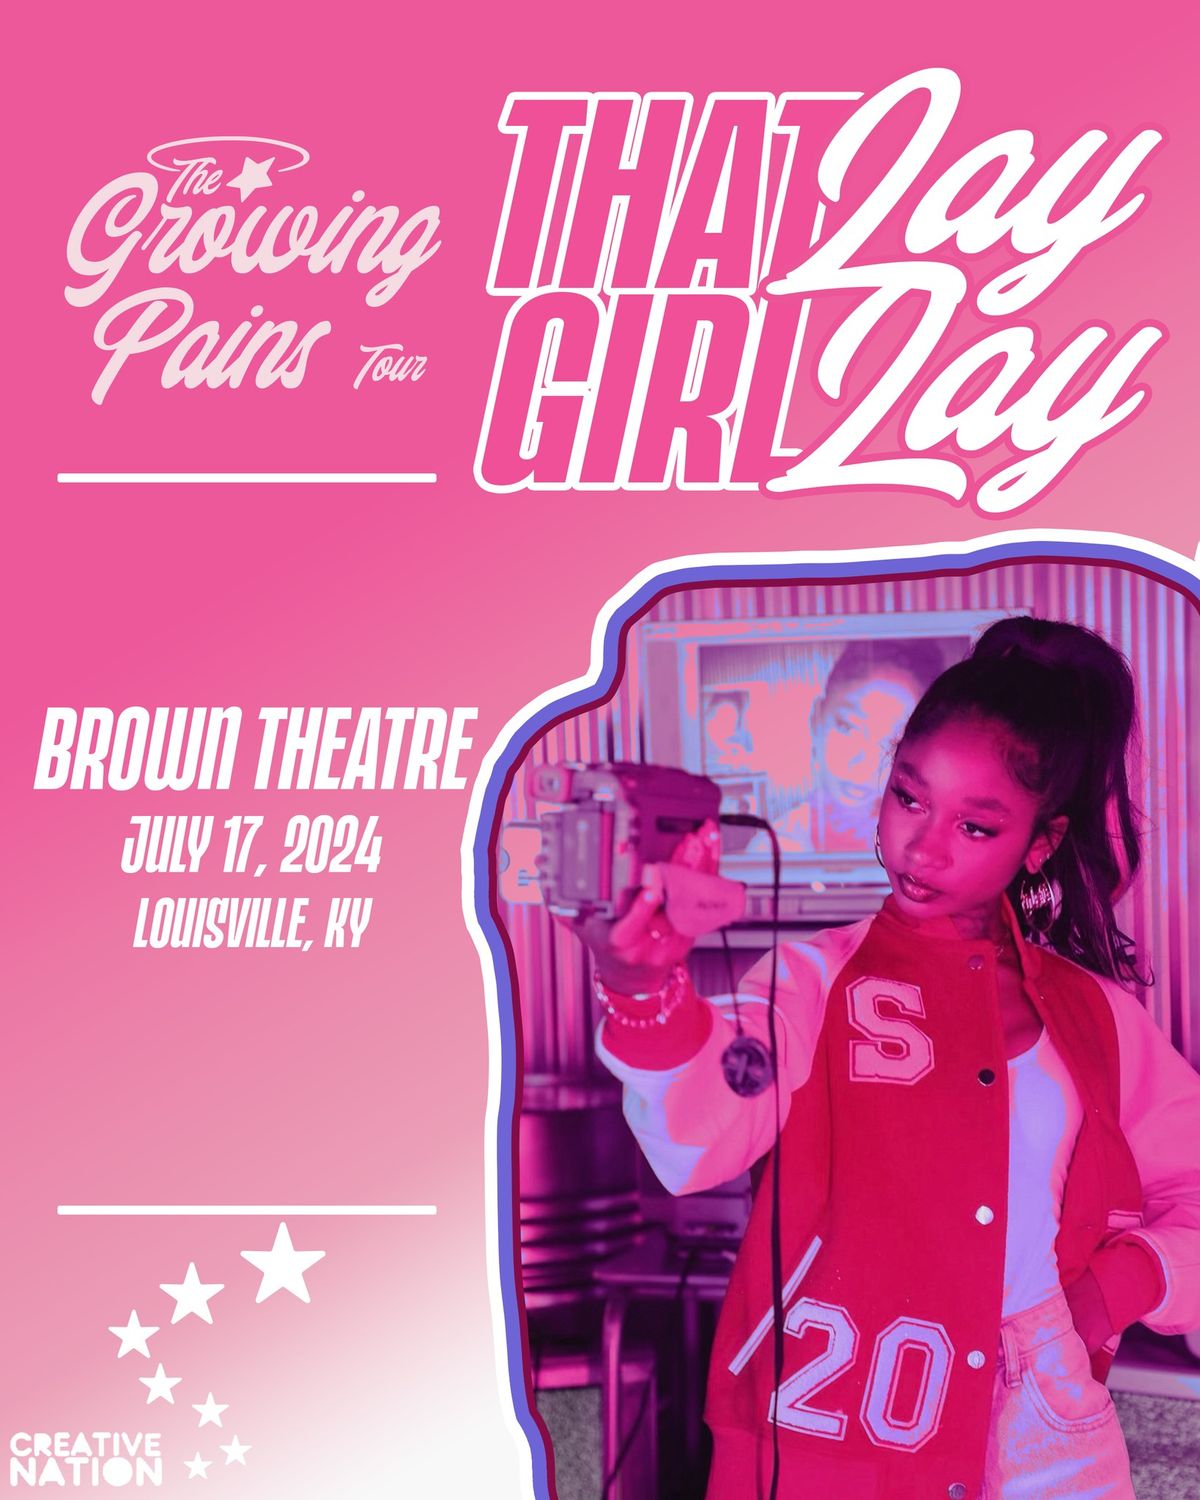 That Girl Lay Lay: The Growing Pains Tour